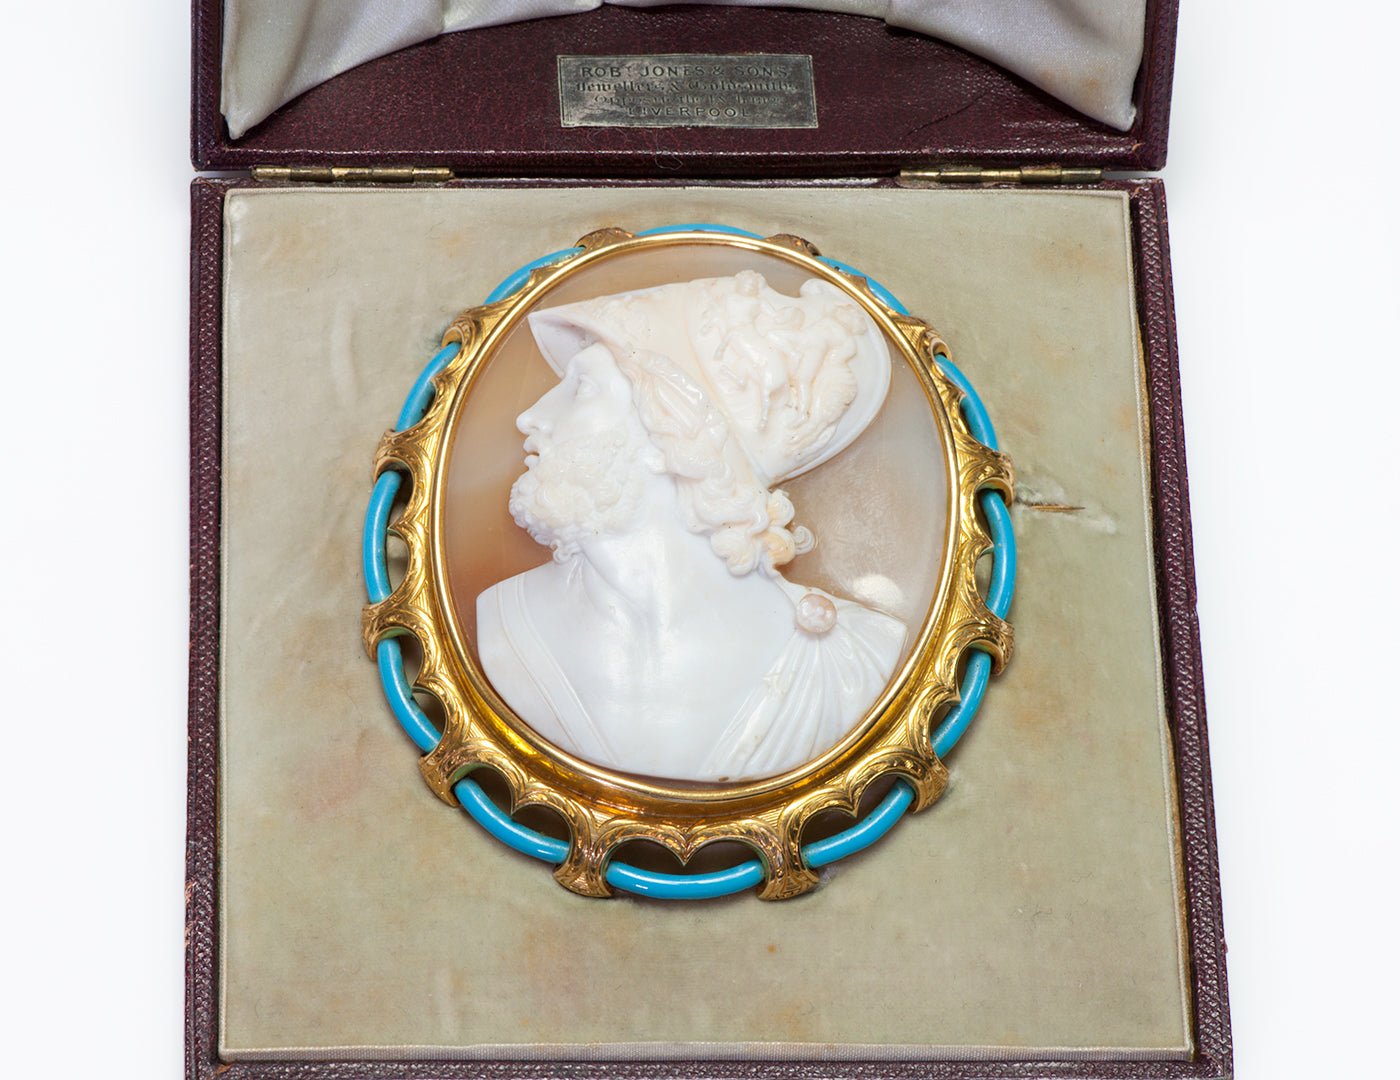 Antique Gold Enamel Large Stone Shell Cameo Brooch - DSF Antique Jewelry